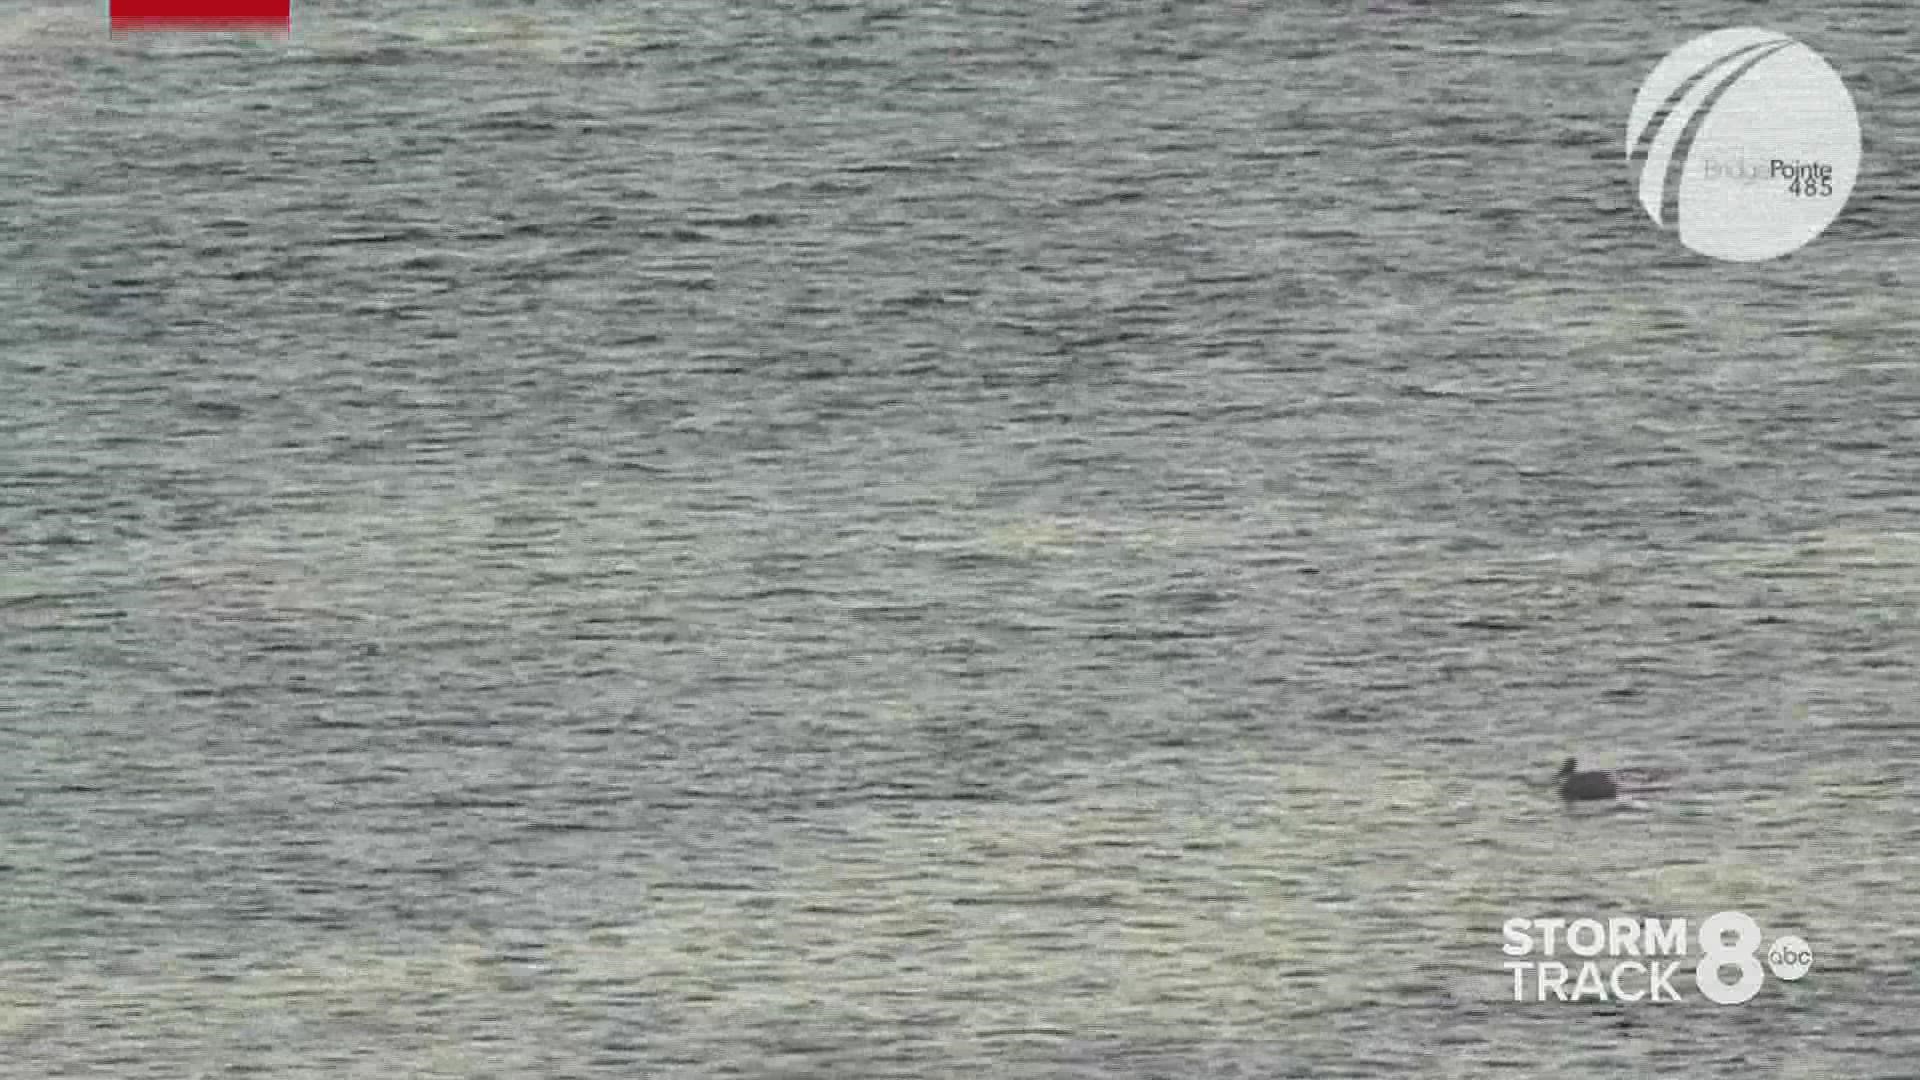 News 8's Andrew Stutzke spots a pelican out on the Mississippi River with our live cam, and David Bohlman guesses what pelicans sound like.